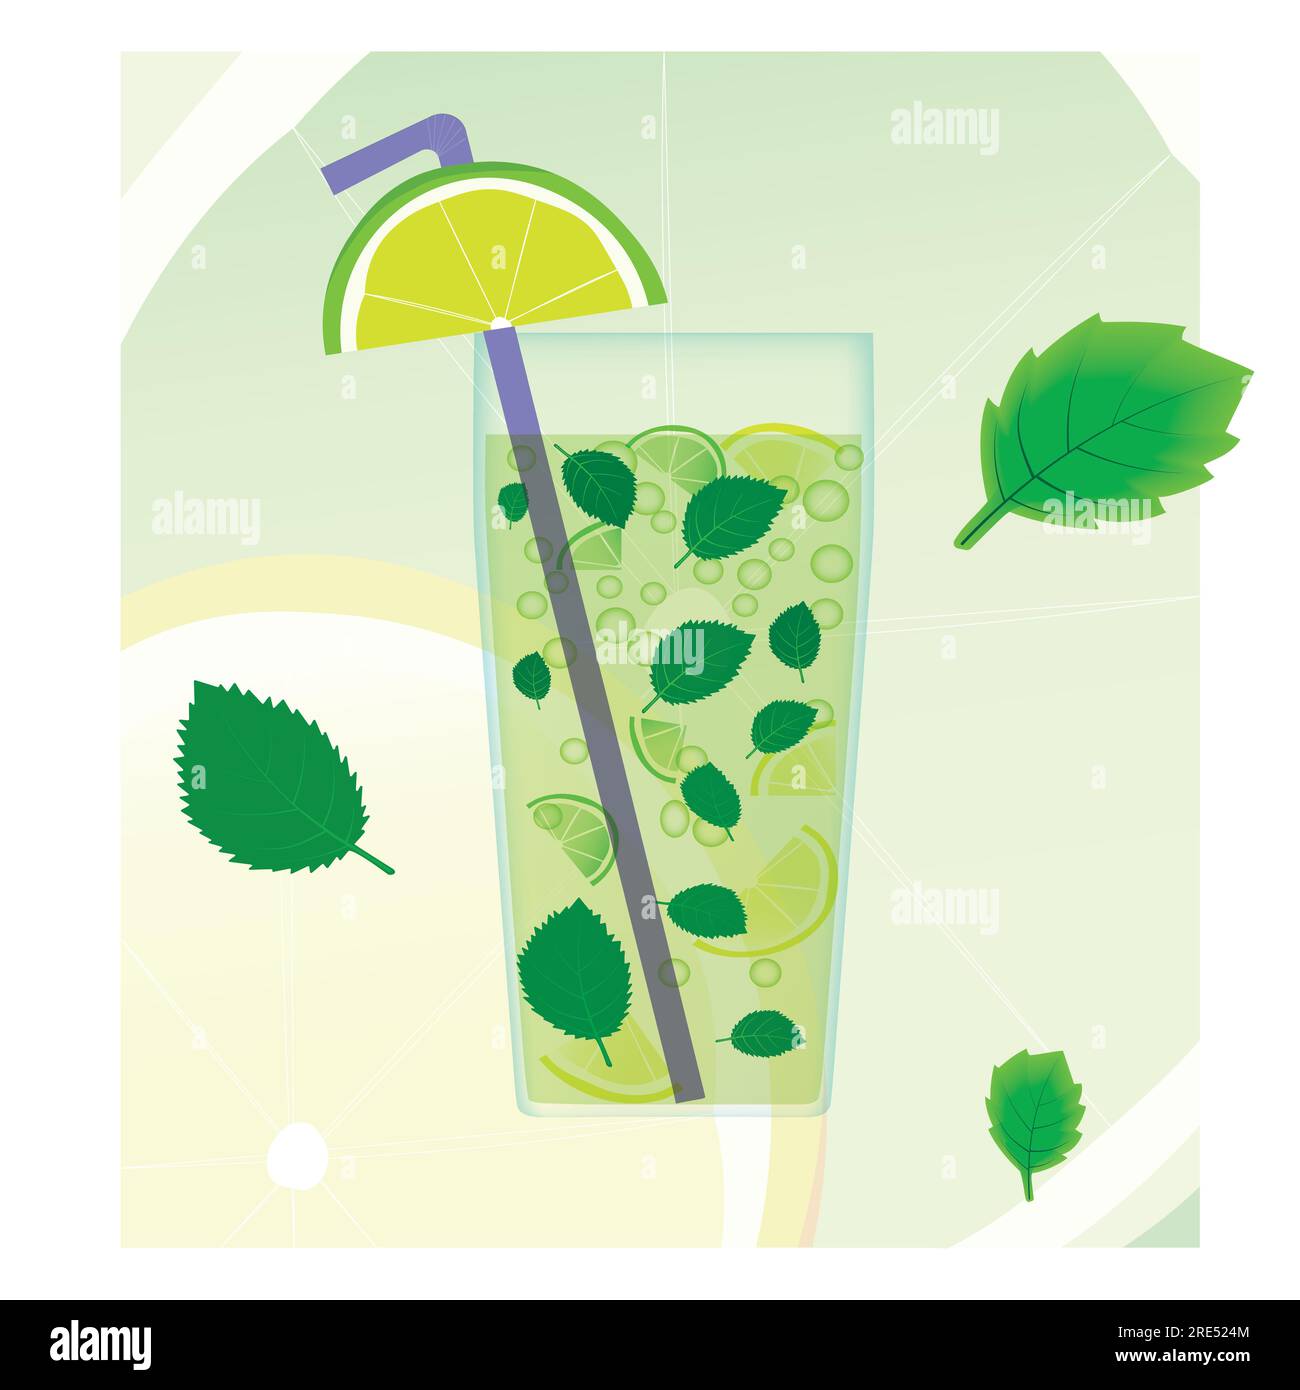 https://c8.alamy.com/comp/2RE524M/a-glass-of-cold-refreshing-mojito-with-a-salt-shaker-2RE524M.jpg